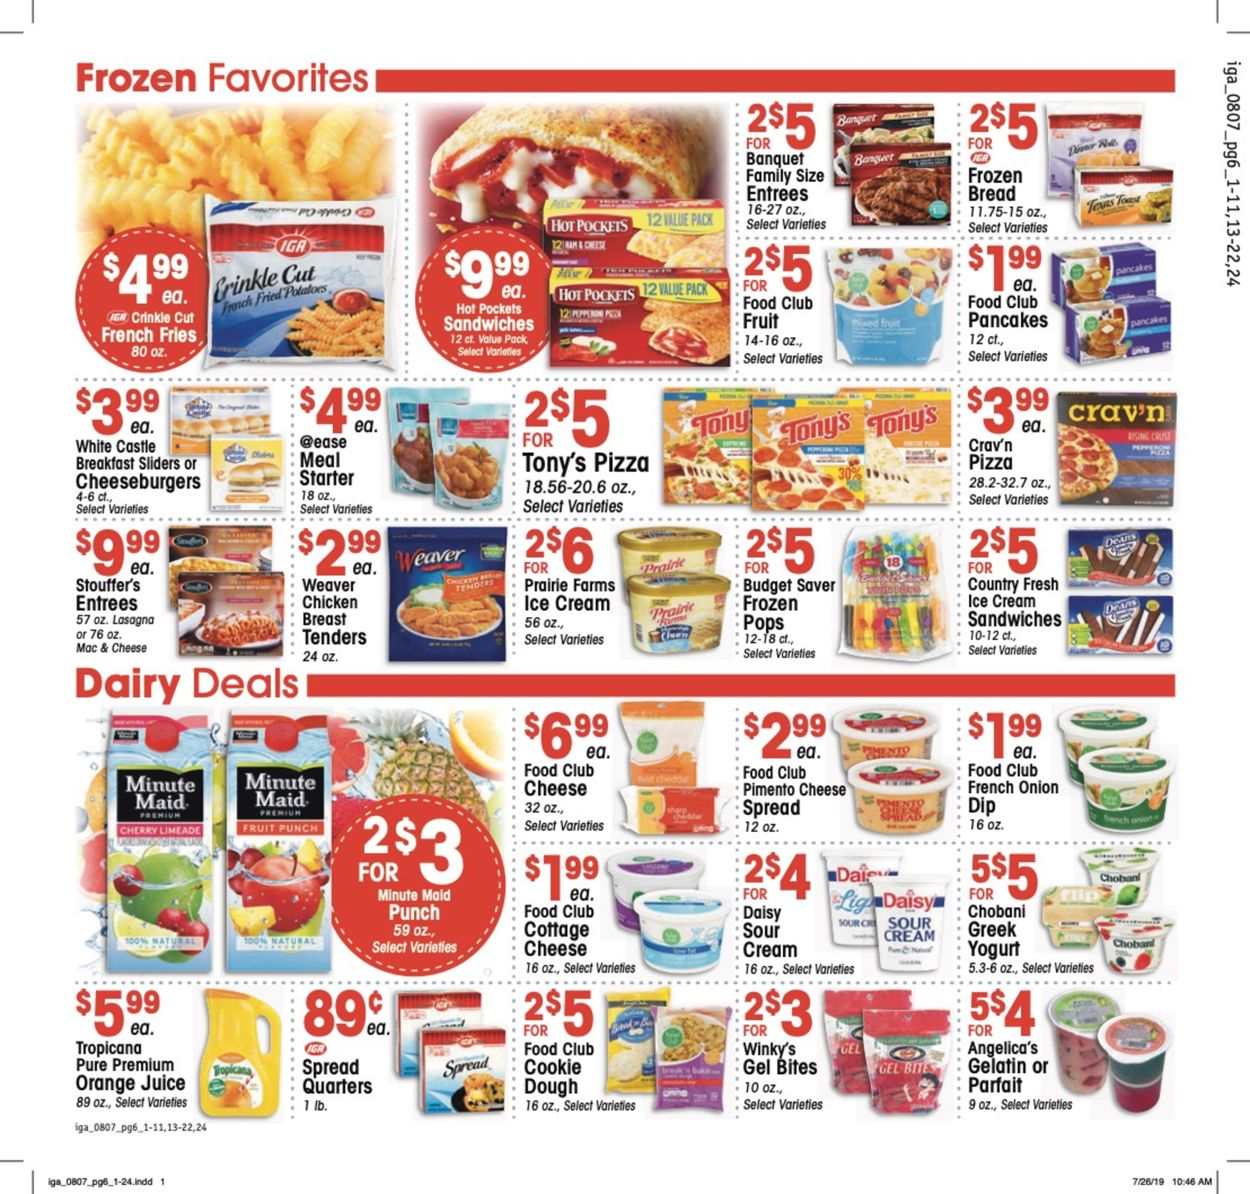 IGA Ad from 08/07/2019